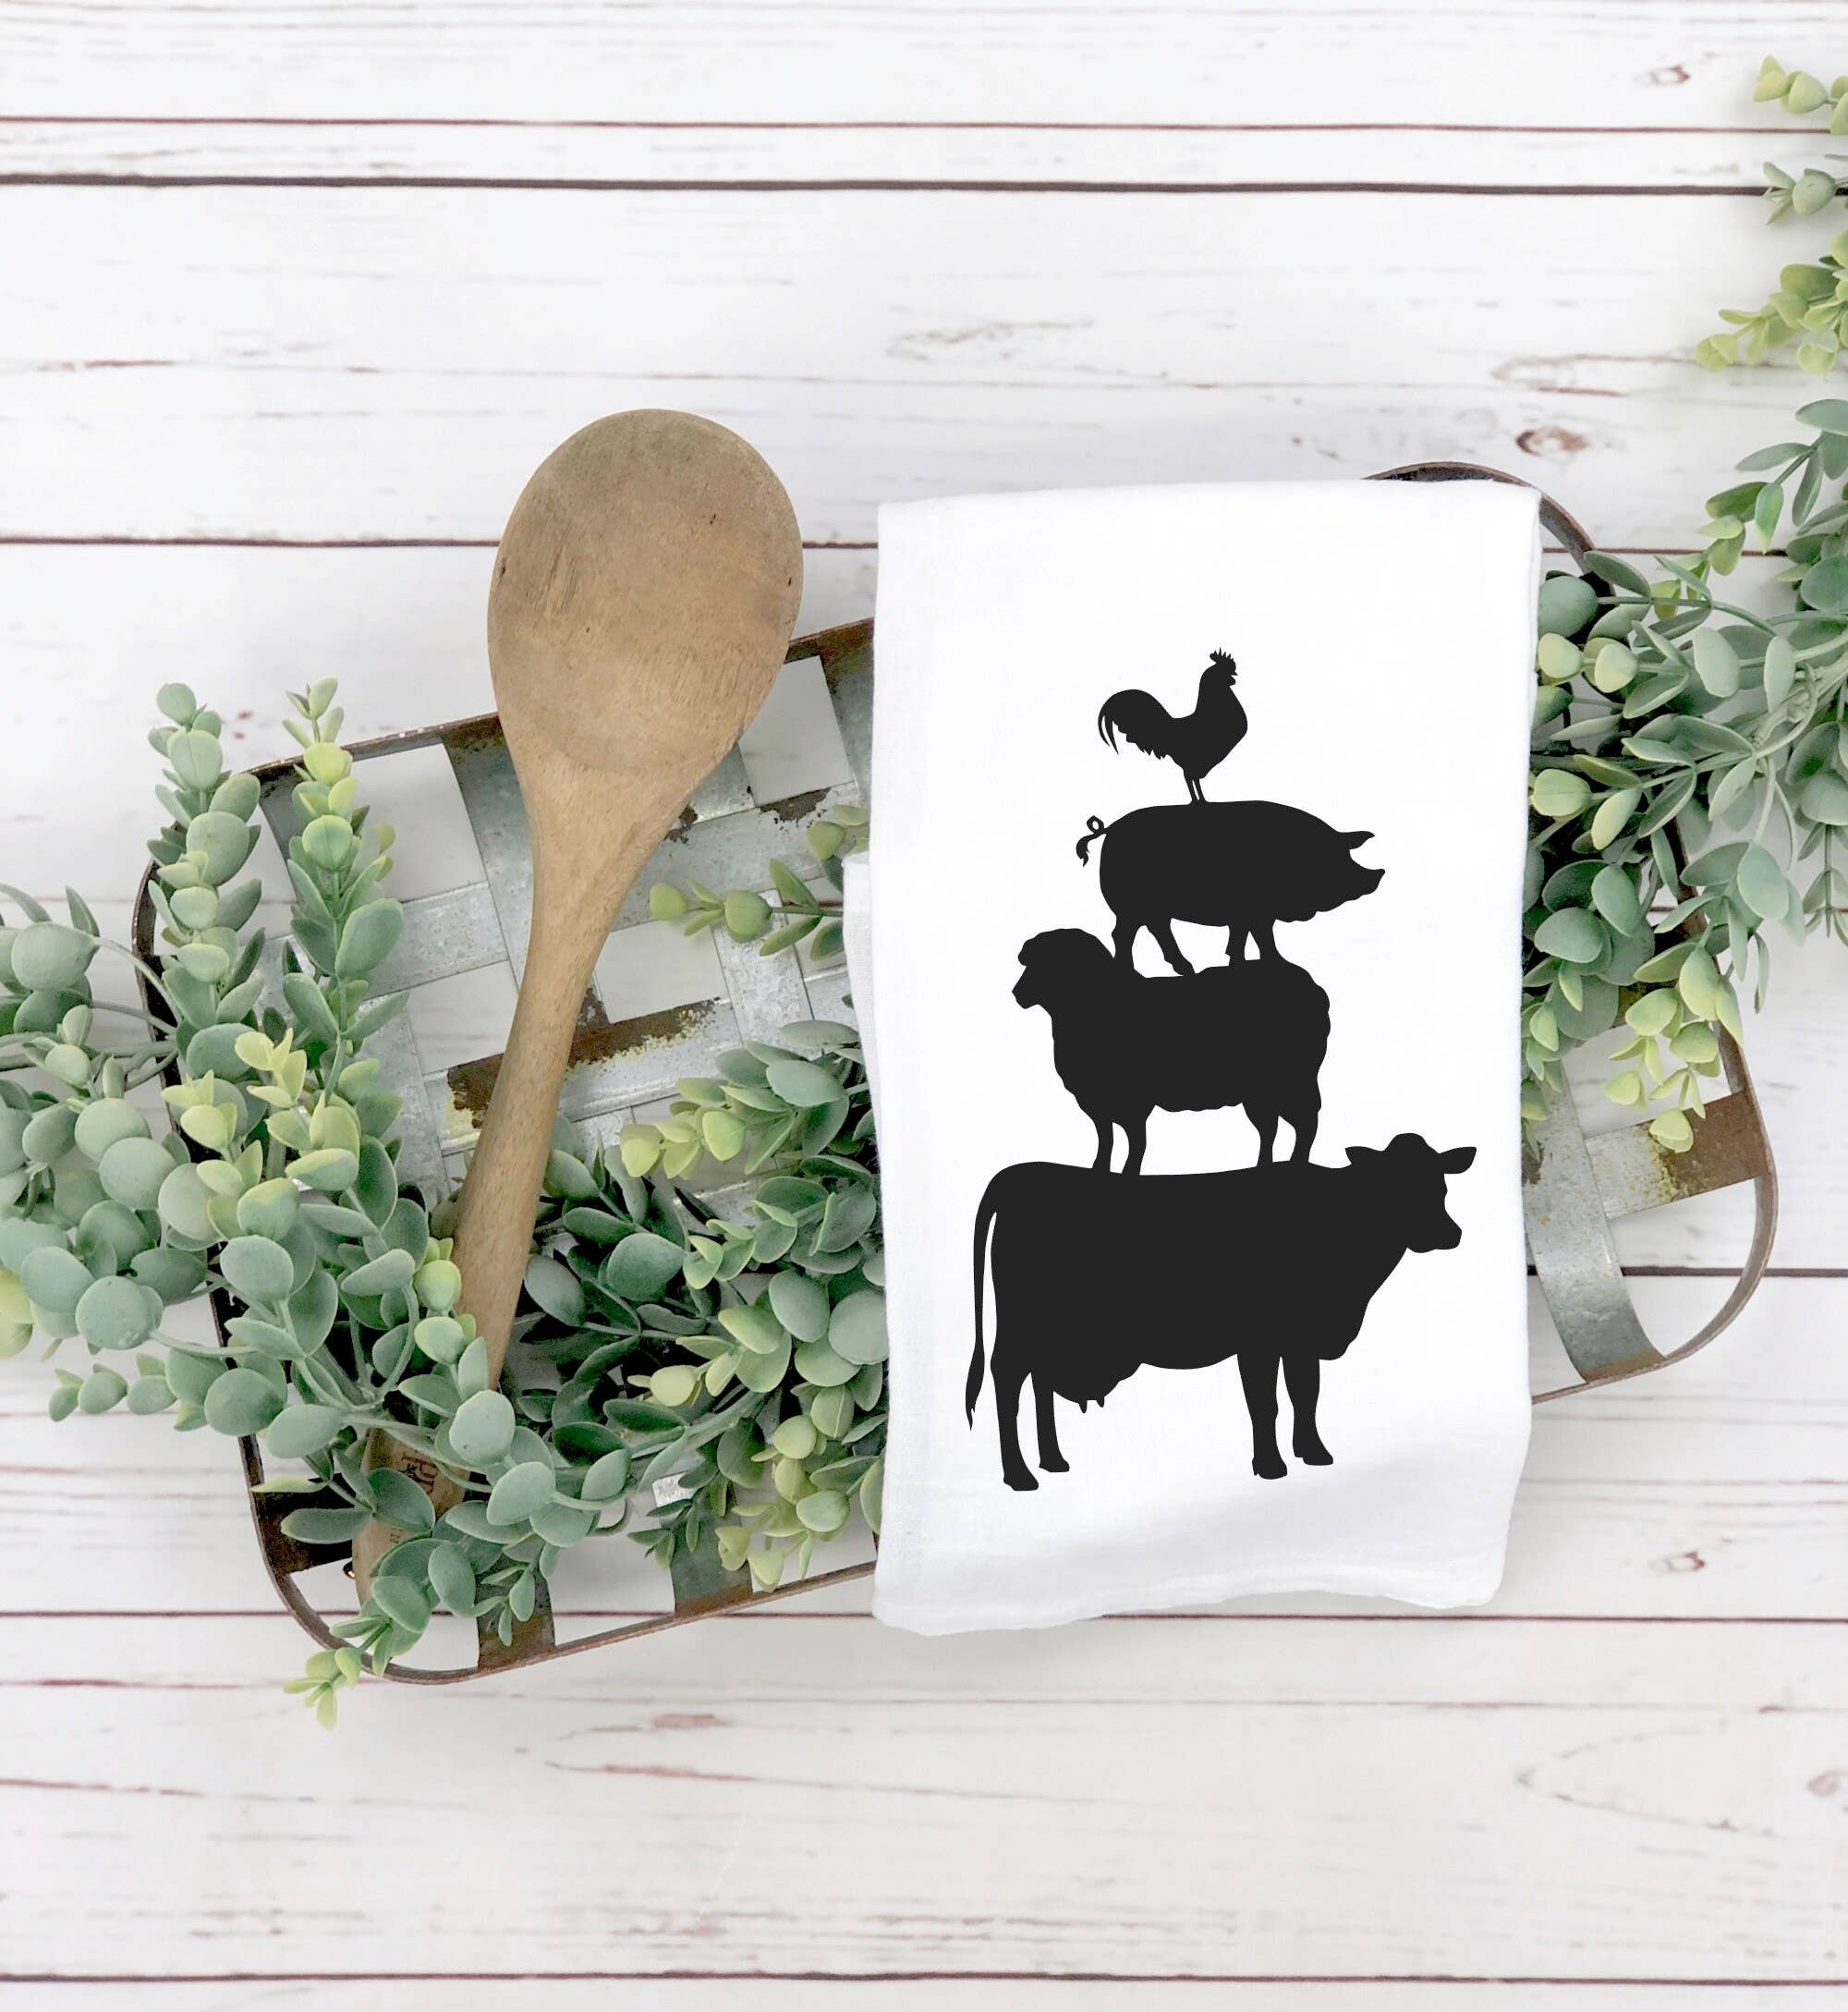 The Animal Stack Tea Towel, with silhouettes of cows and chickens, is perfect for a farmhouse-style kitchen.